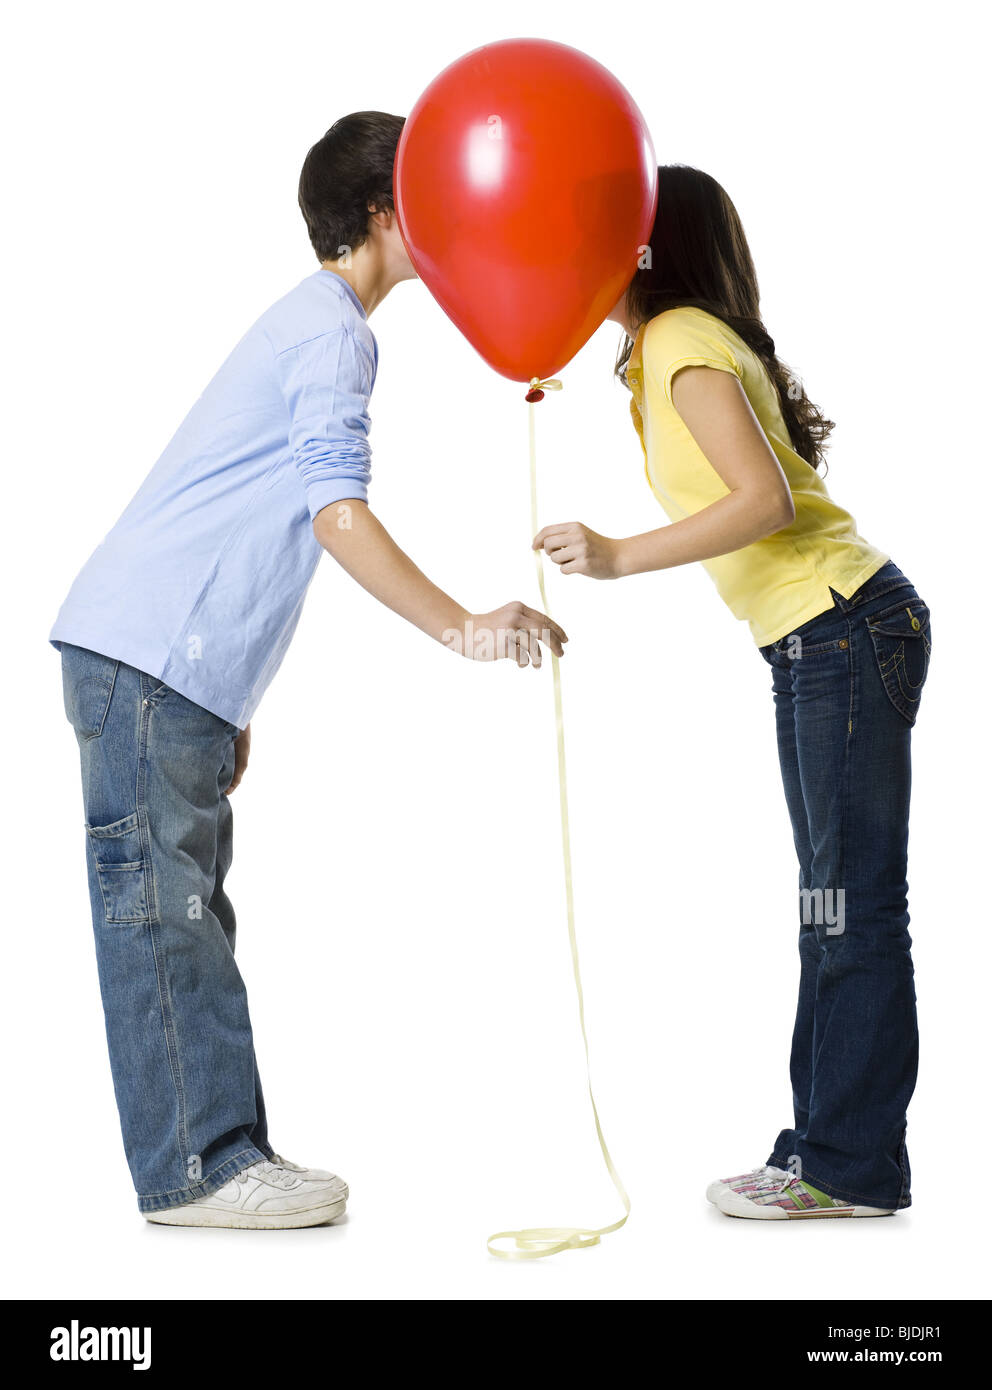 couple kissing behind a red balloon Stock Photo